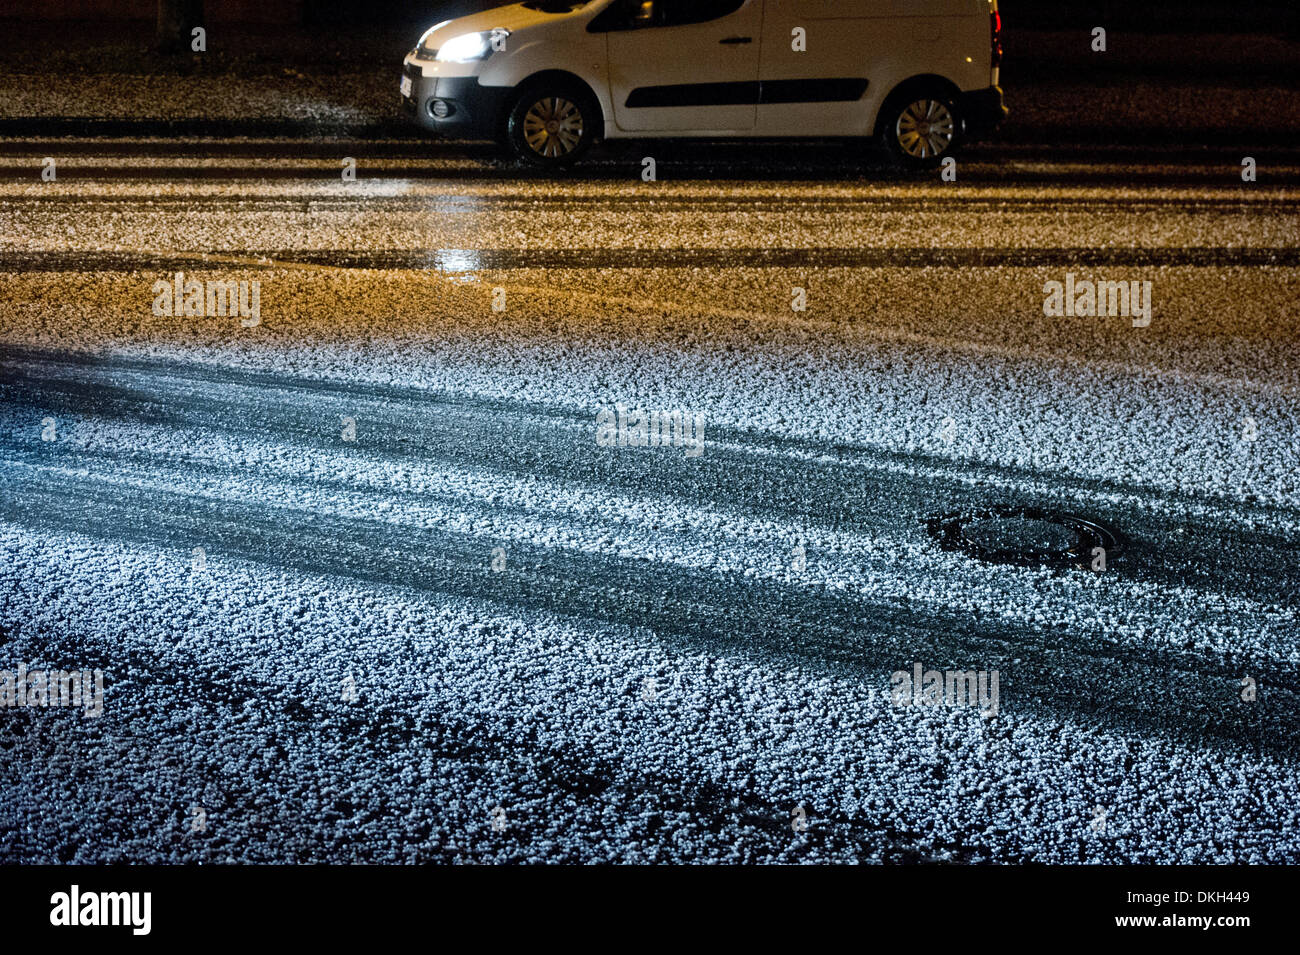 Stralsund, Germany. 5th Dec, 2013. Hail stones cover a street in Stralsund, Germany, 5 December 2013. Storm front Xaver hits northern Germany. Photo: Stefan Sauer/dpa/Alamy Live News Stock Photo